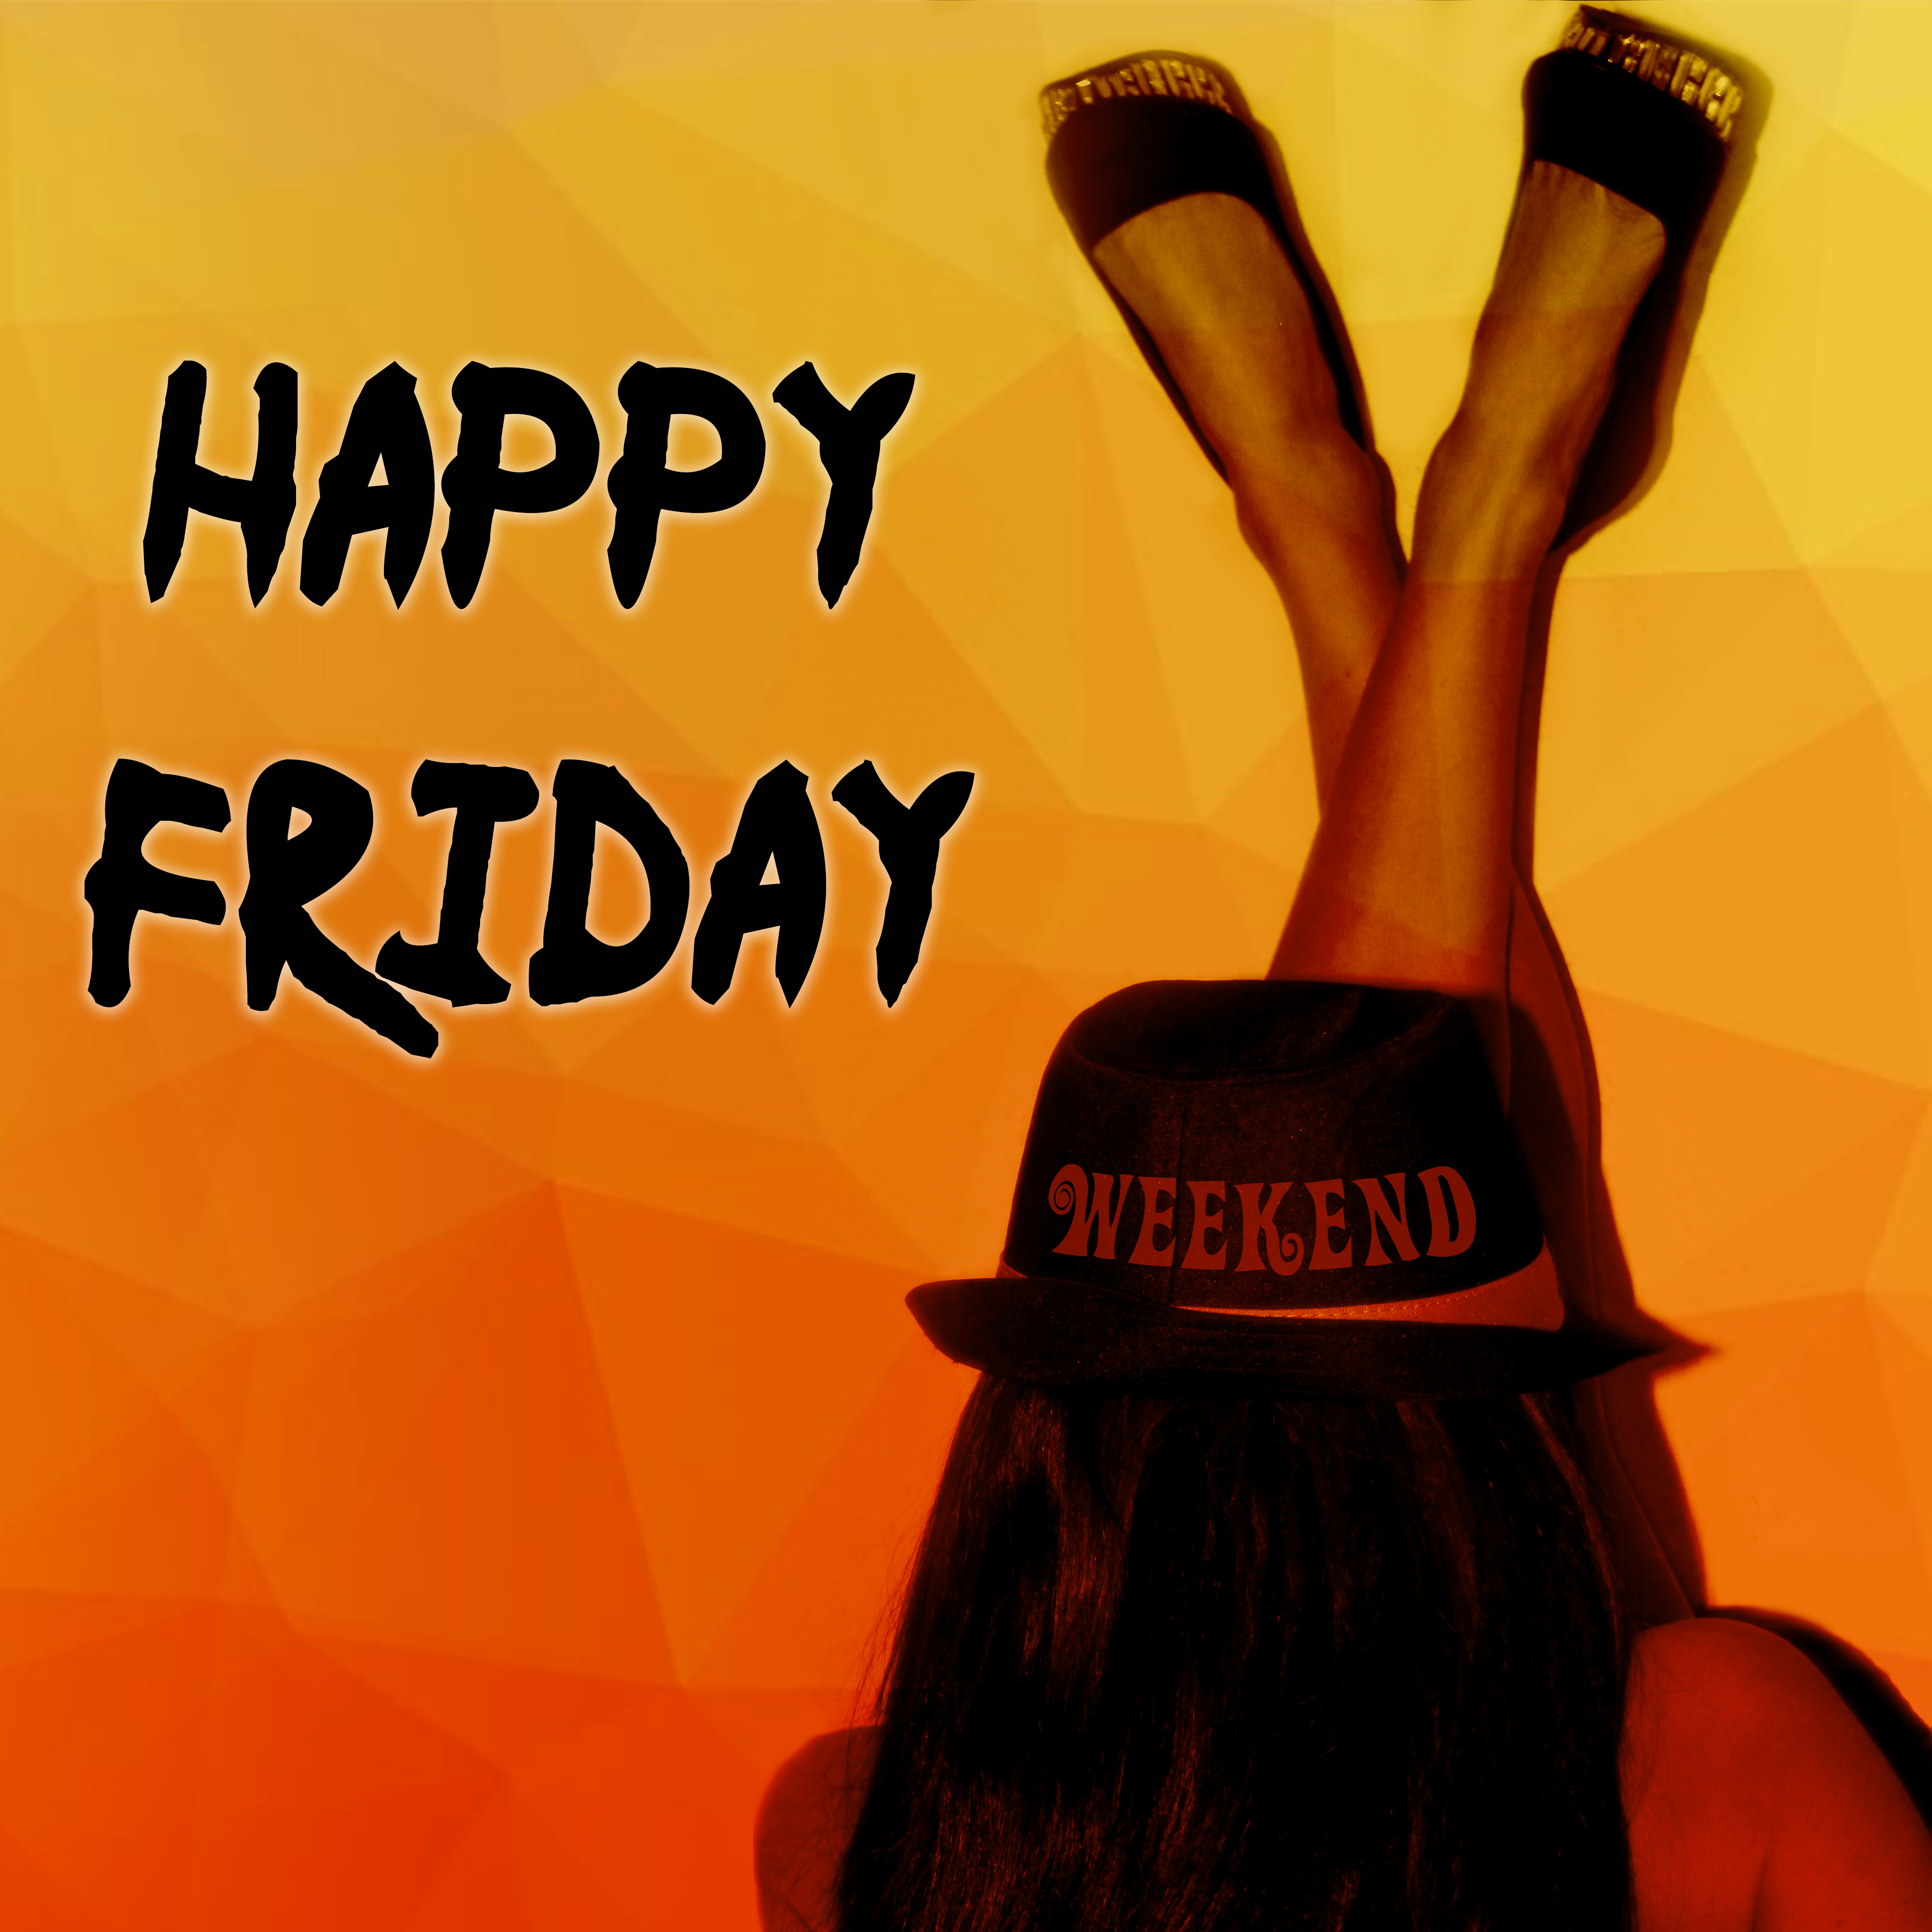 Happy Friday - 30 Tracks & Ways to Relax, Music on Everyday, Piano & Smooth Jazz in Nightclub, Relaxation Music to Chill Out, Dinner Party Music, Background Music & Lounge Music